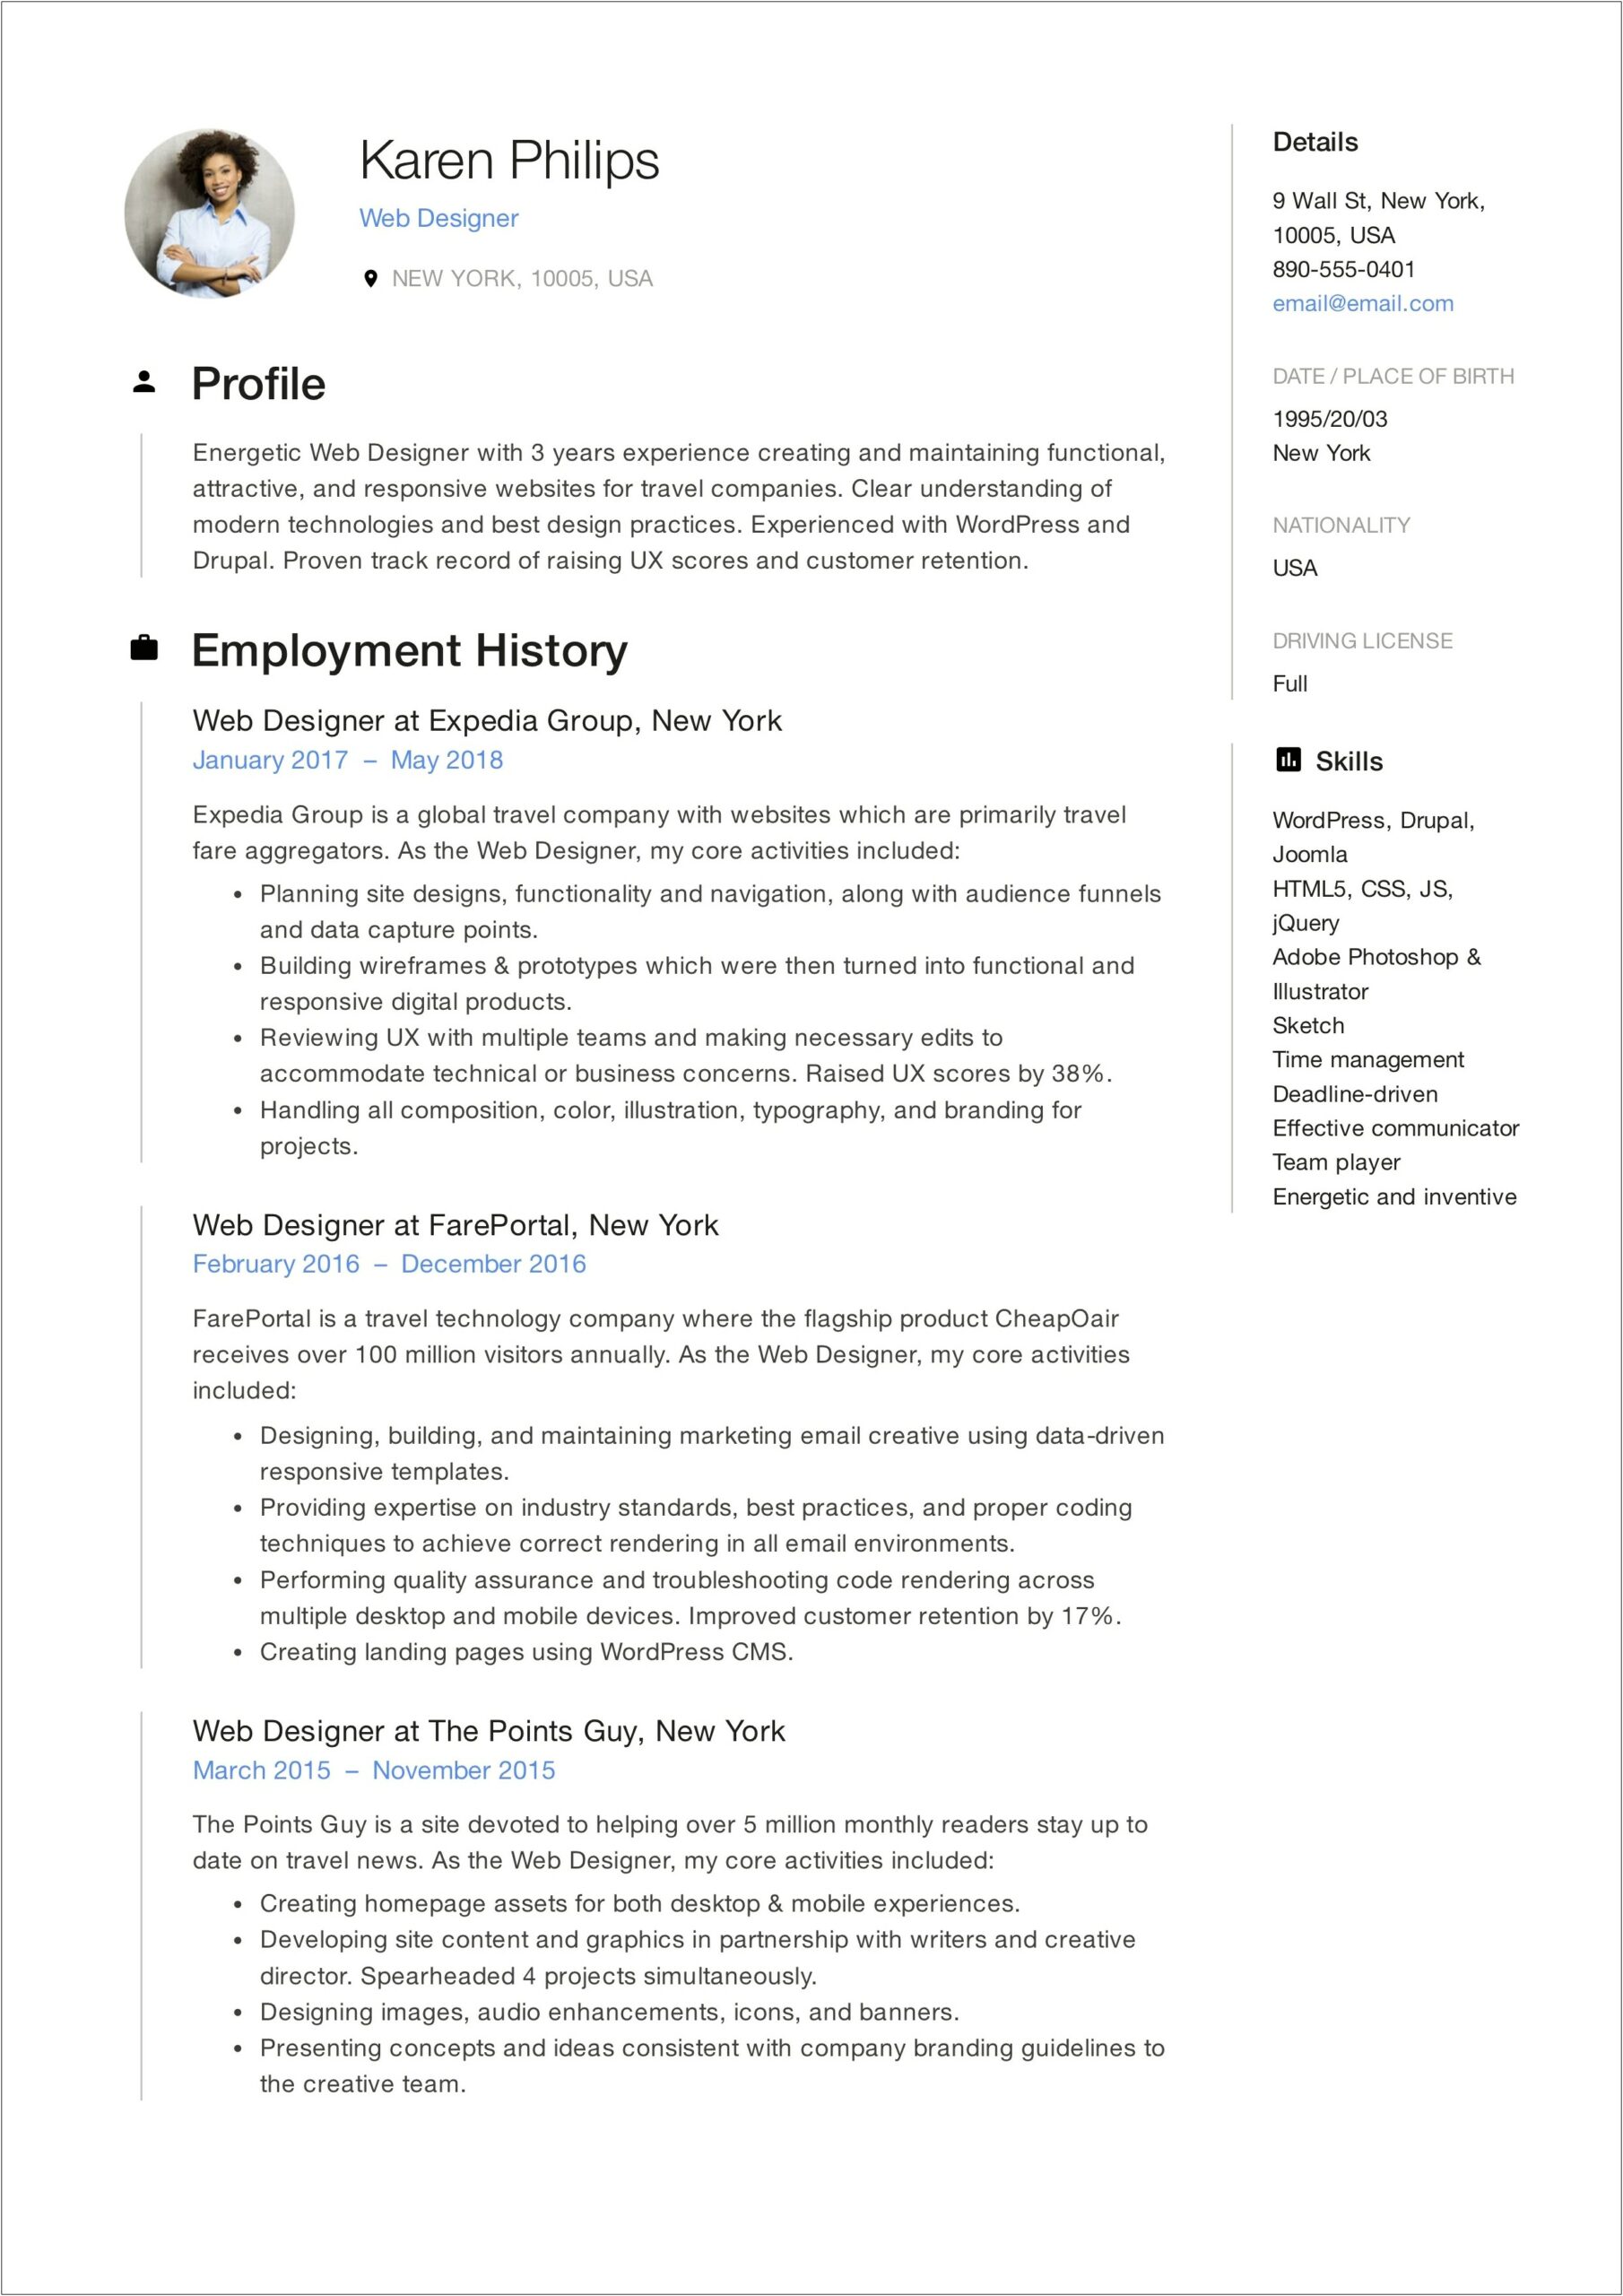 Top Websites To Work On Resumes